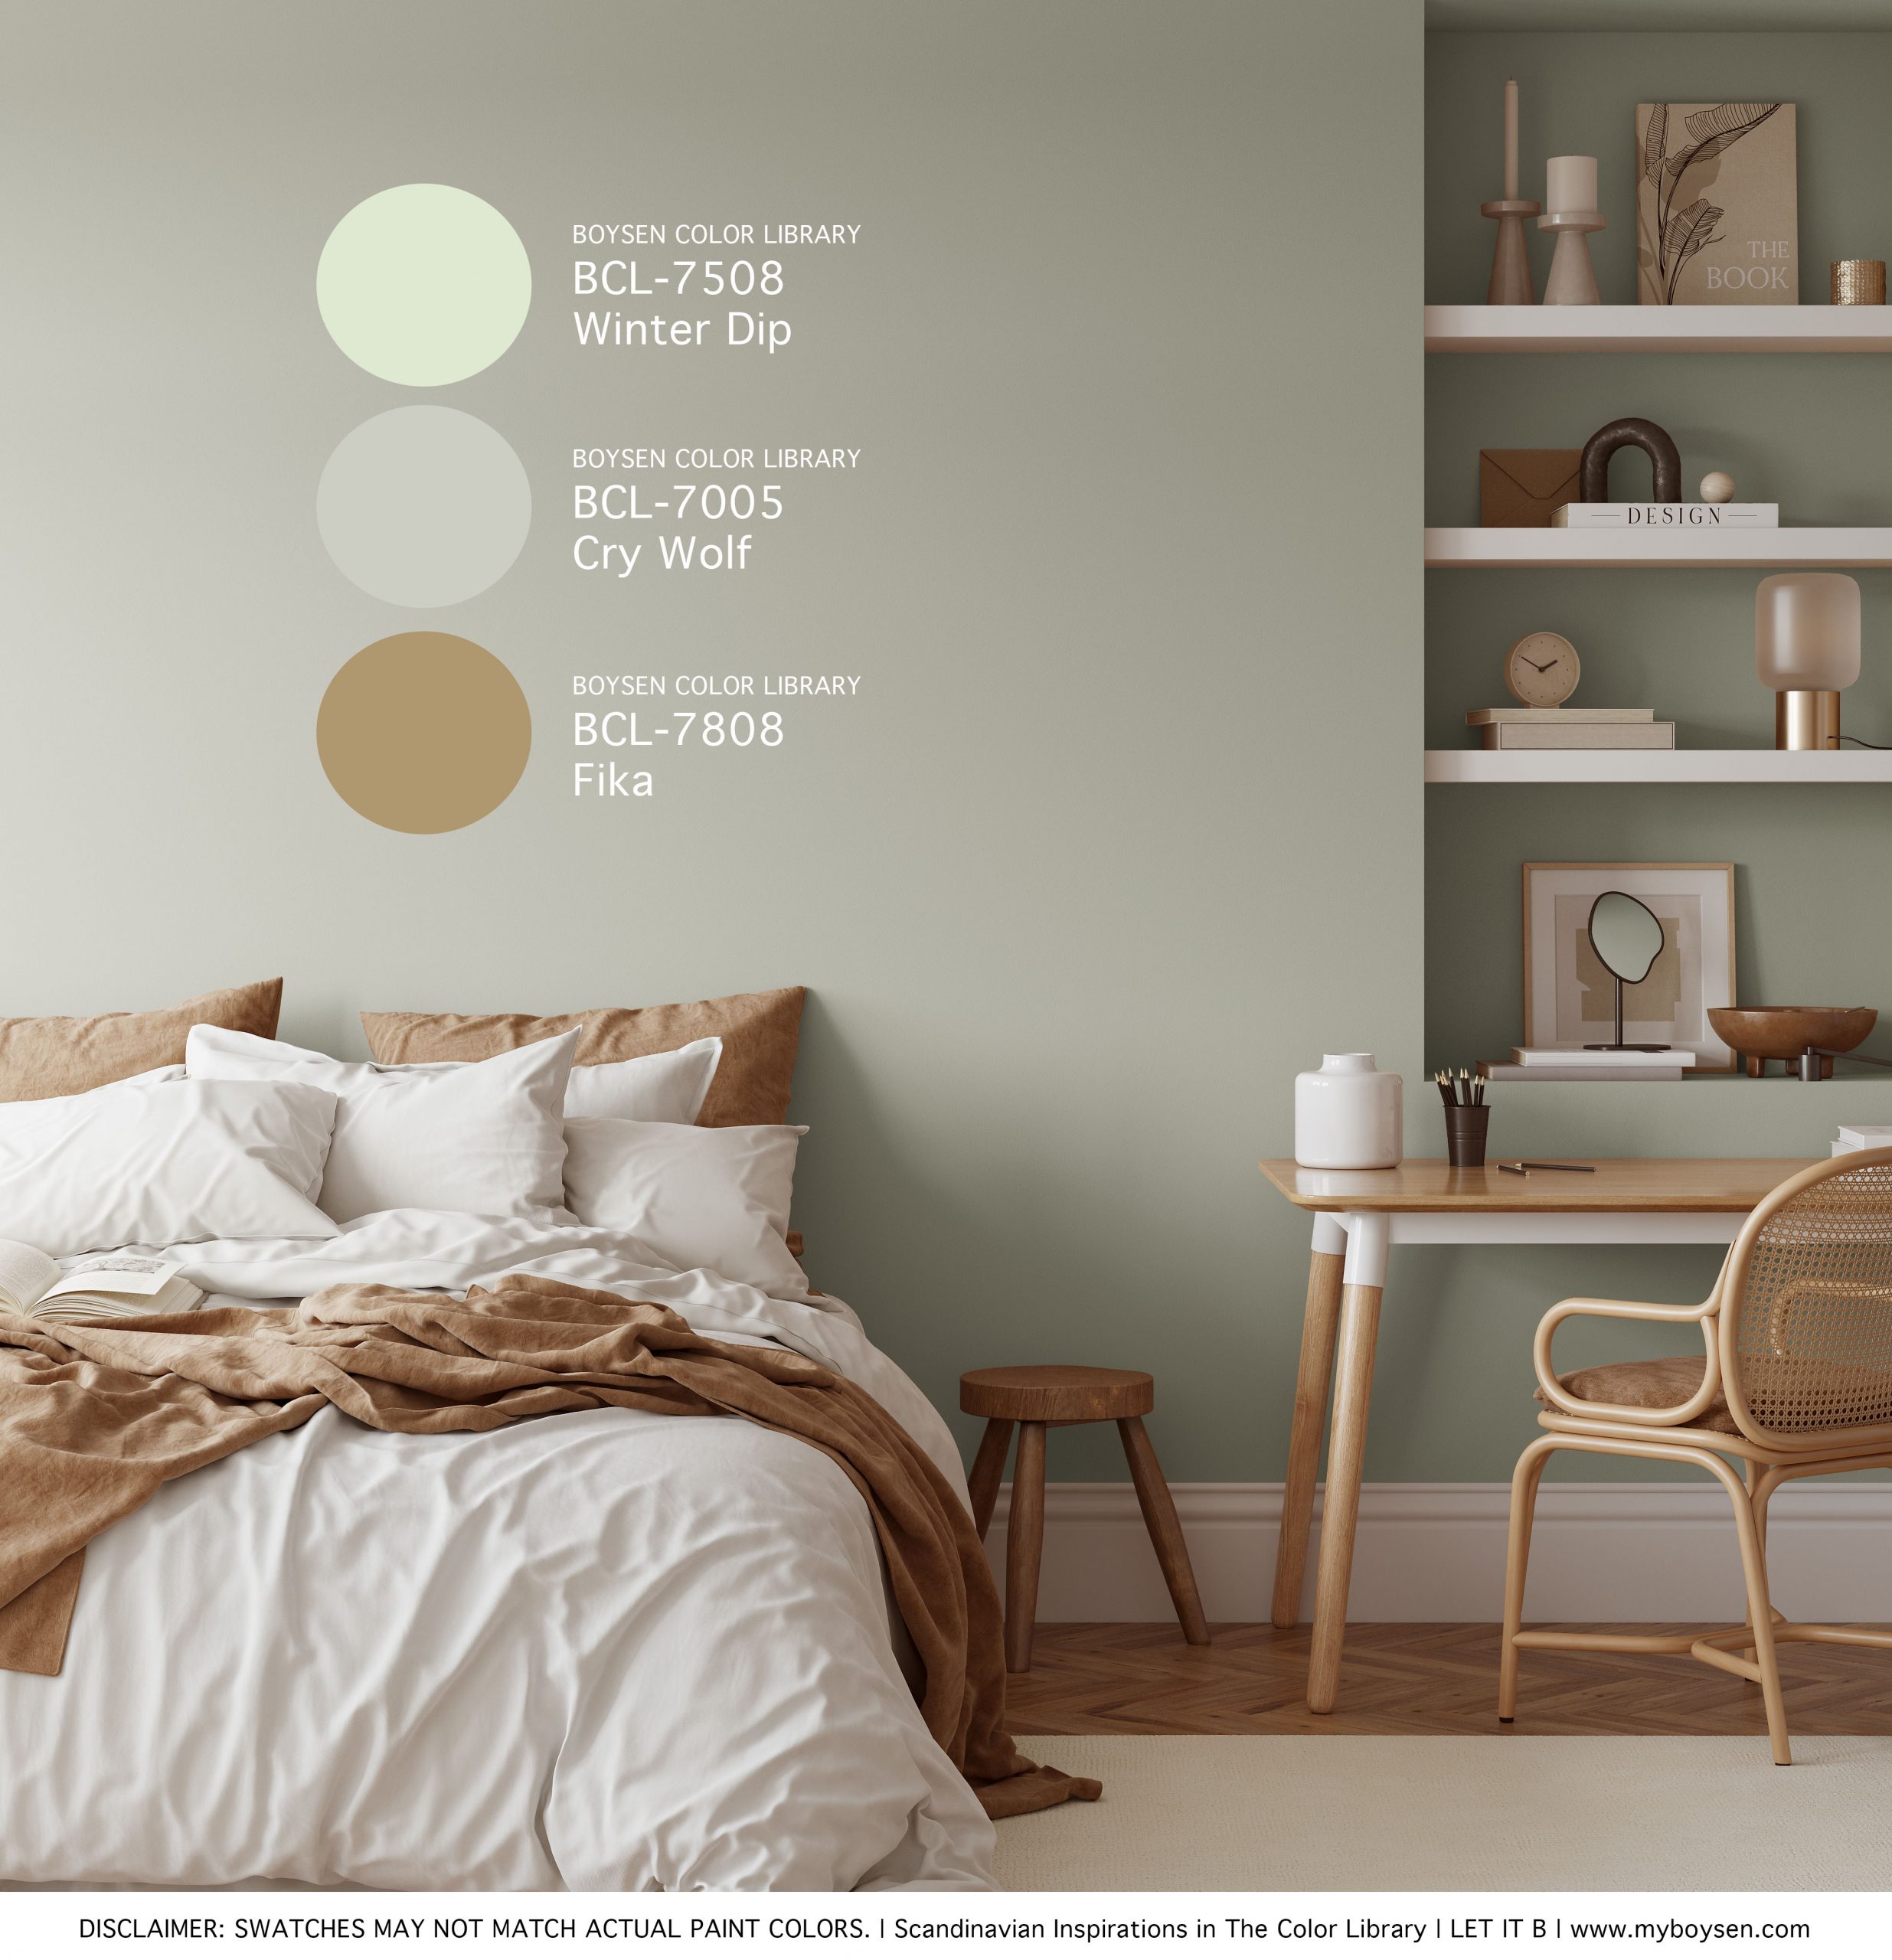 Scandinavian Inspirations in The Color Library | MyBoysen